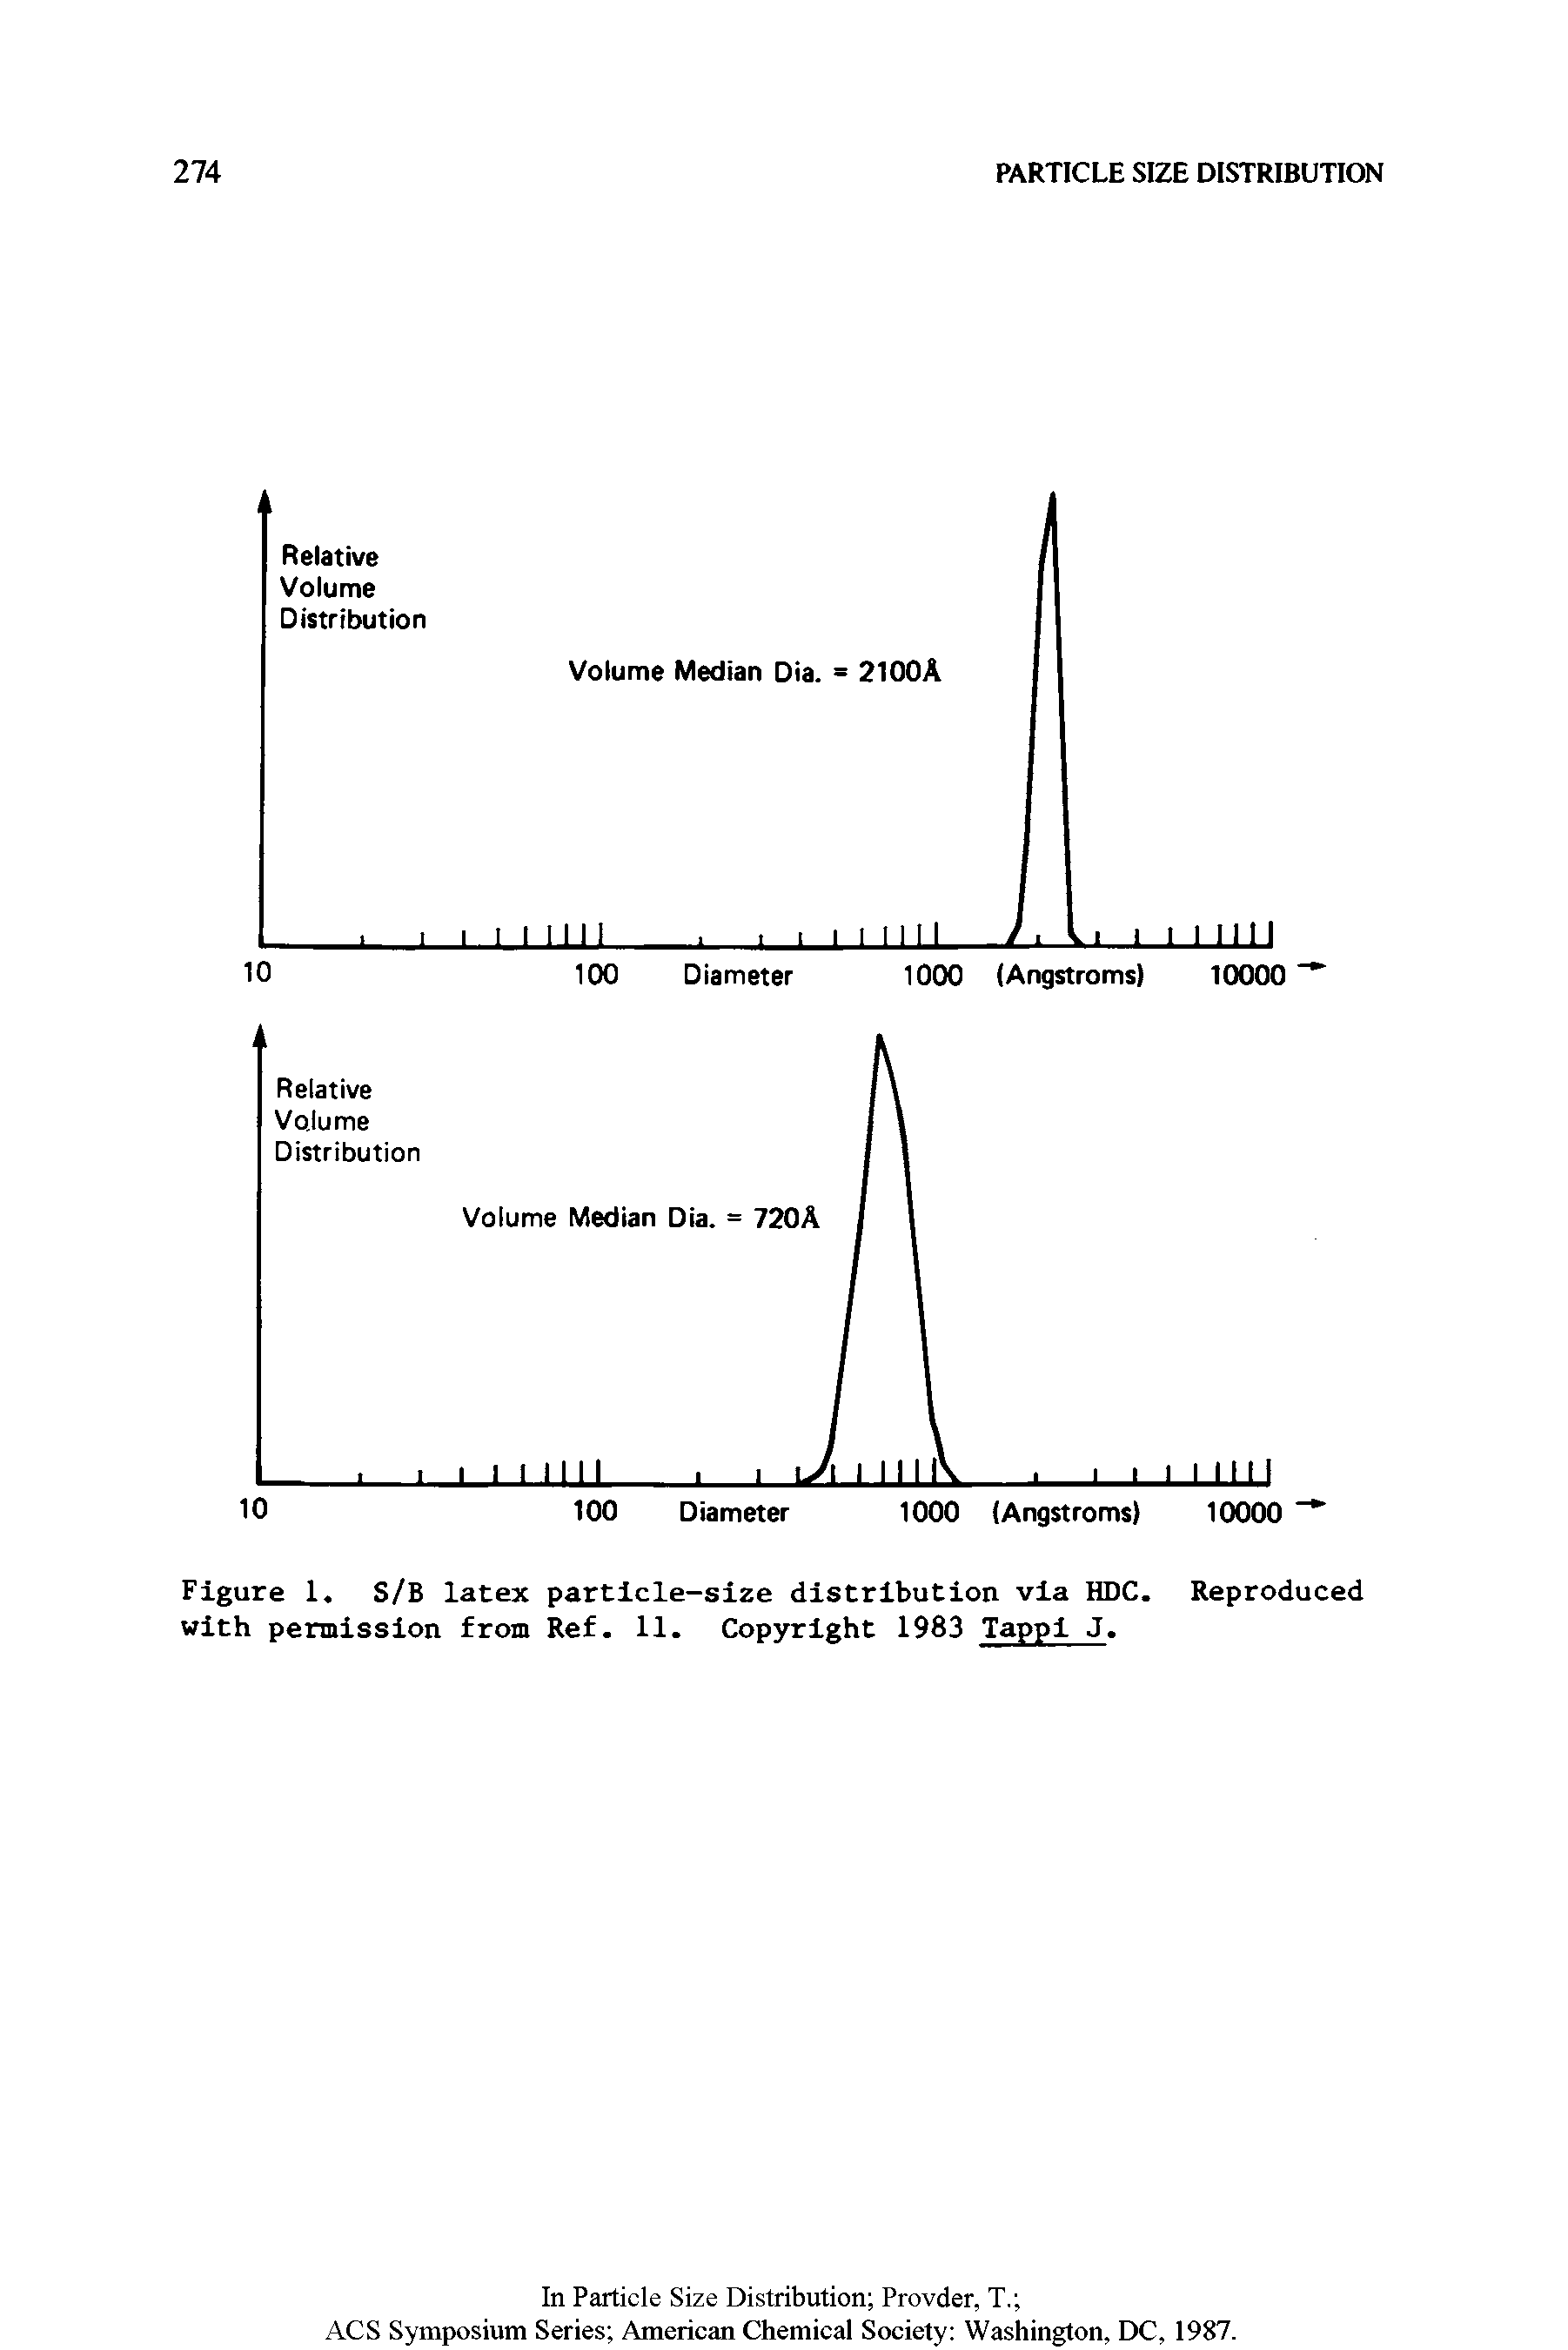 Figure 1. S/B latex particle-size distribution via HDC. with permission from Ref. 11. Copyright 1983 Tappi J.